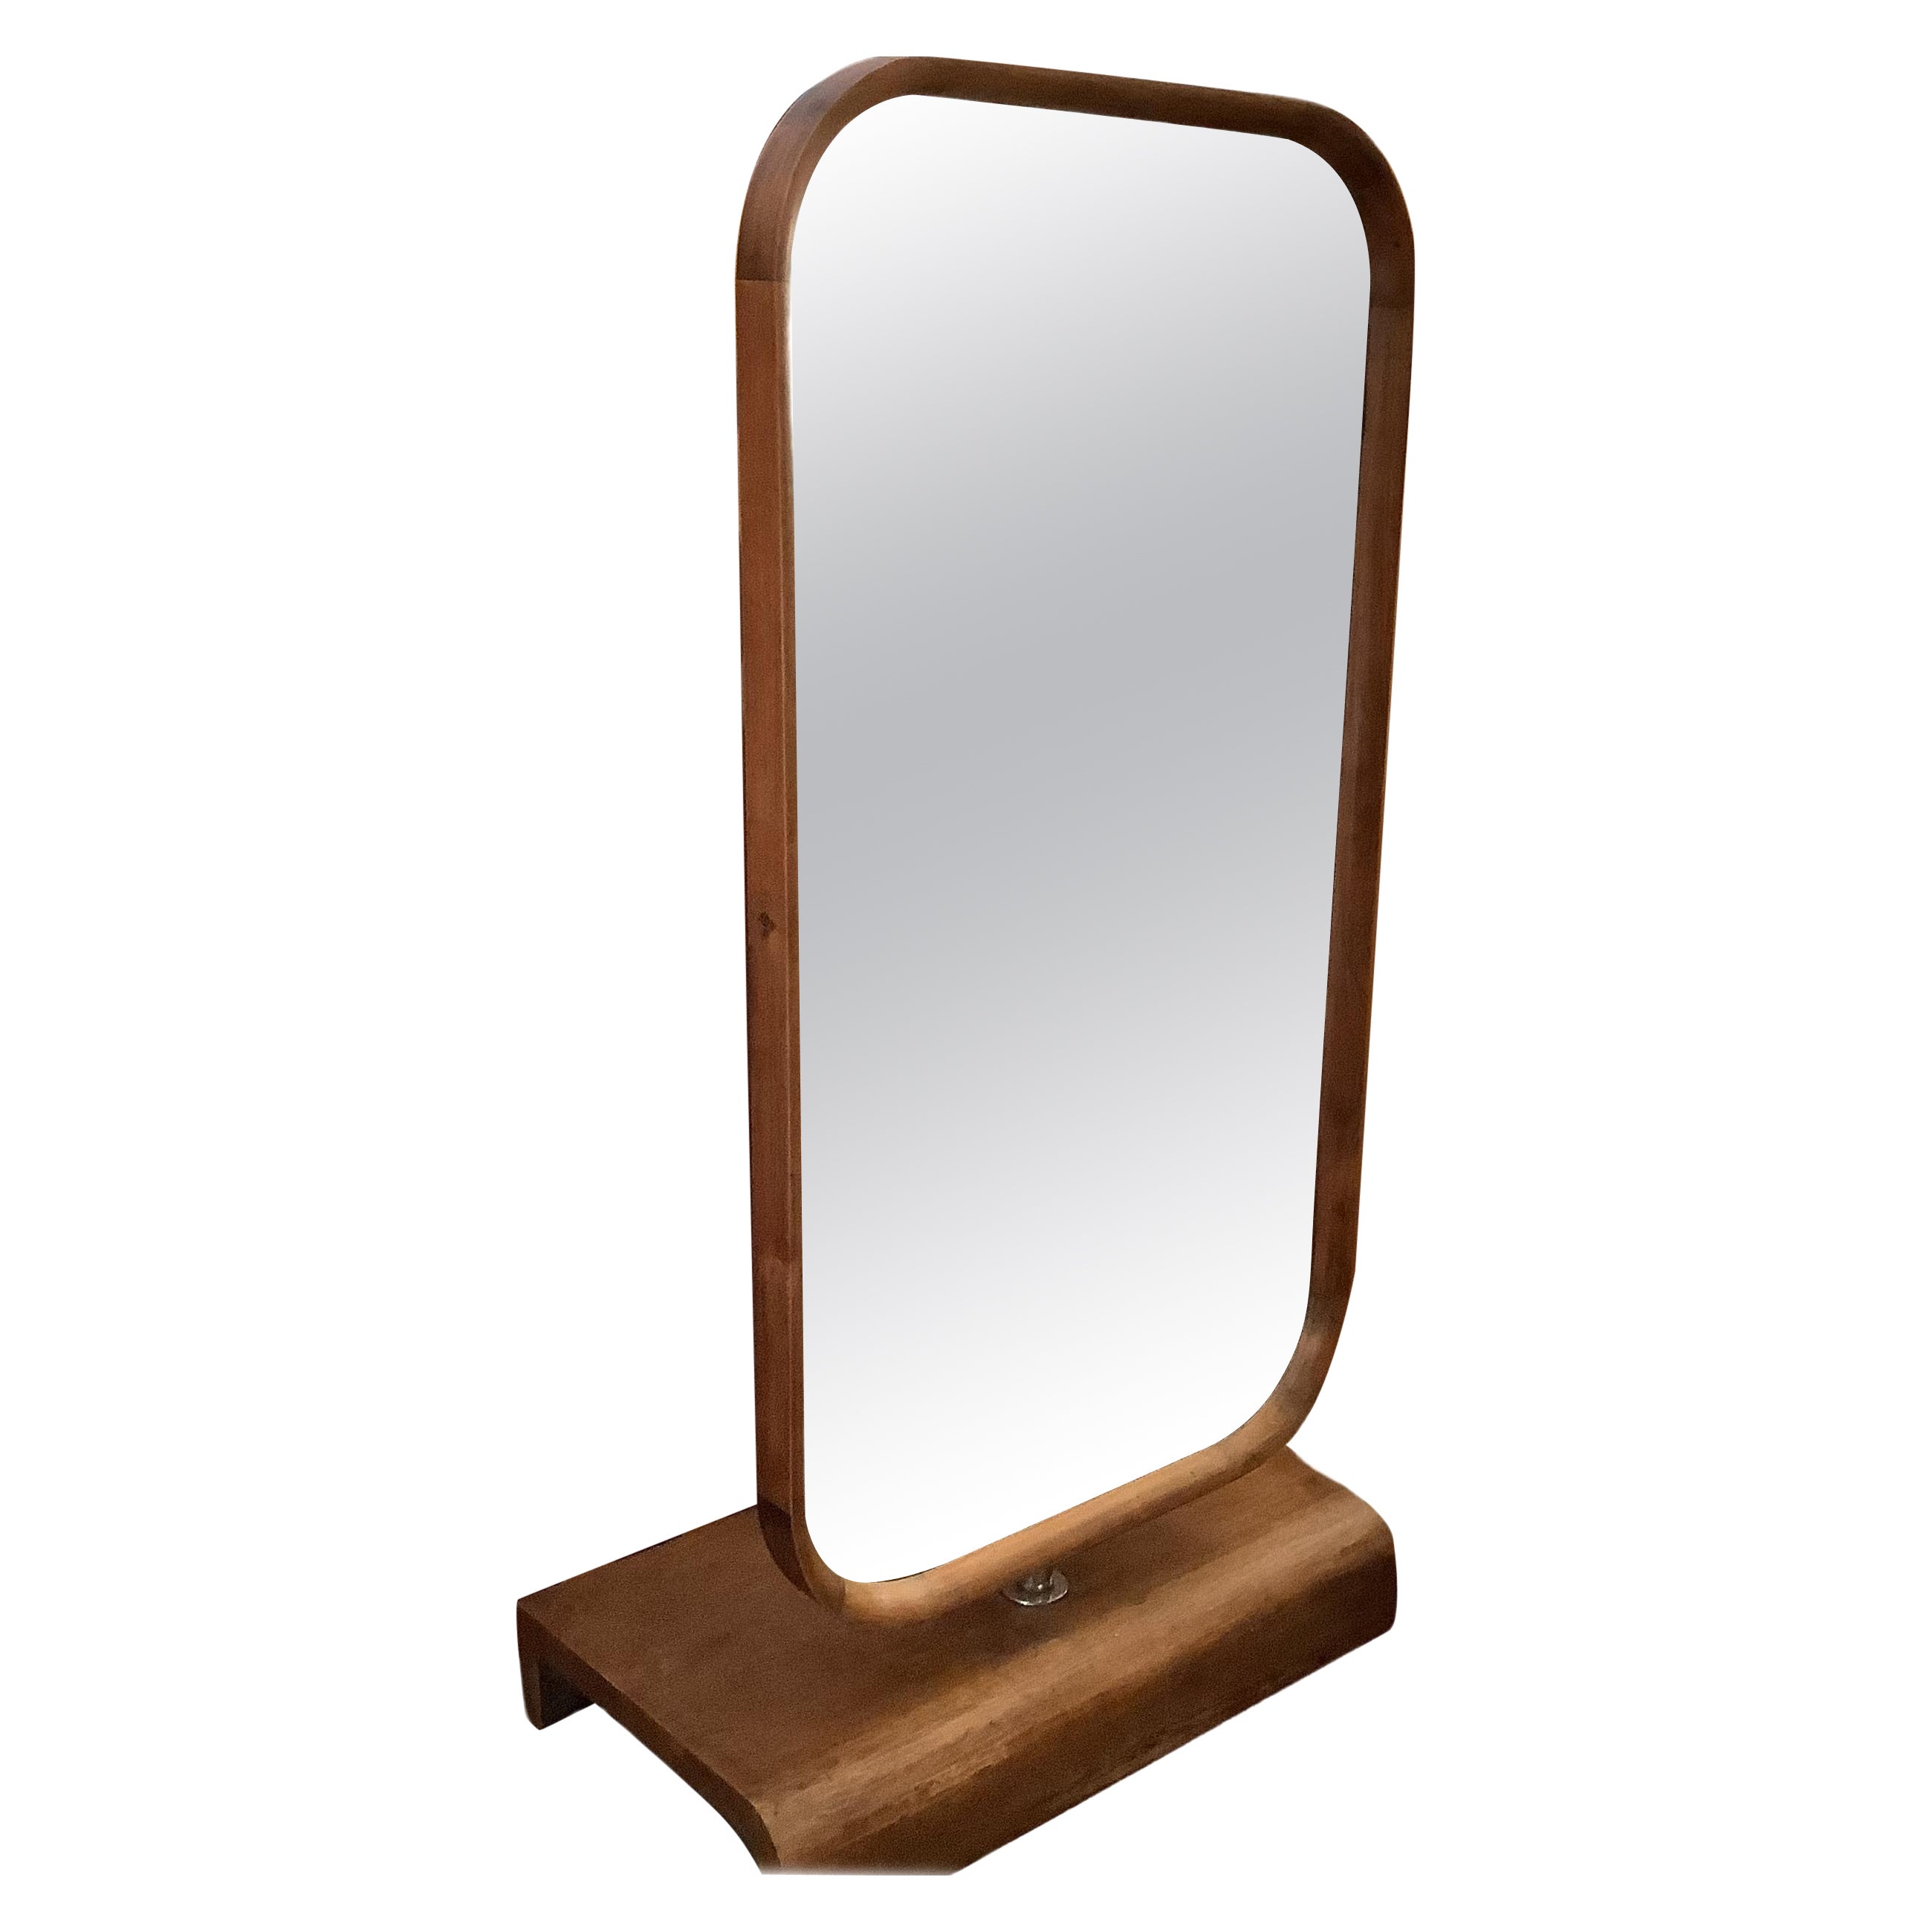 Beech Floor Mirrors and Full-Length Mirrors